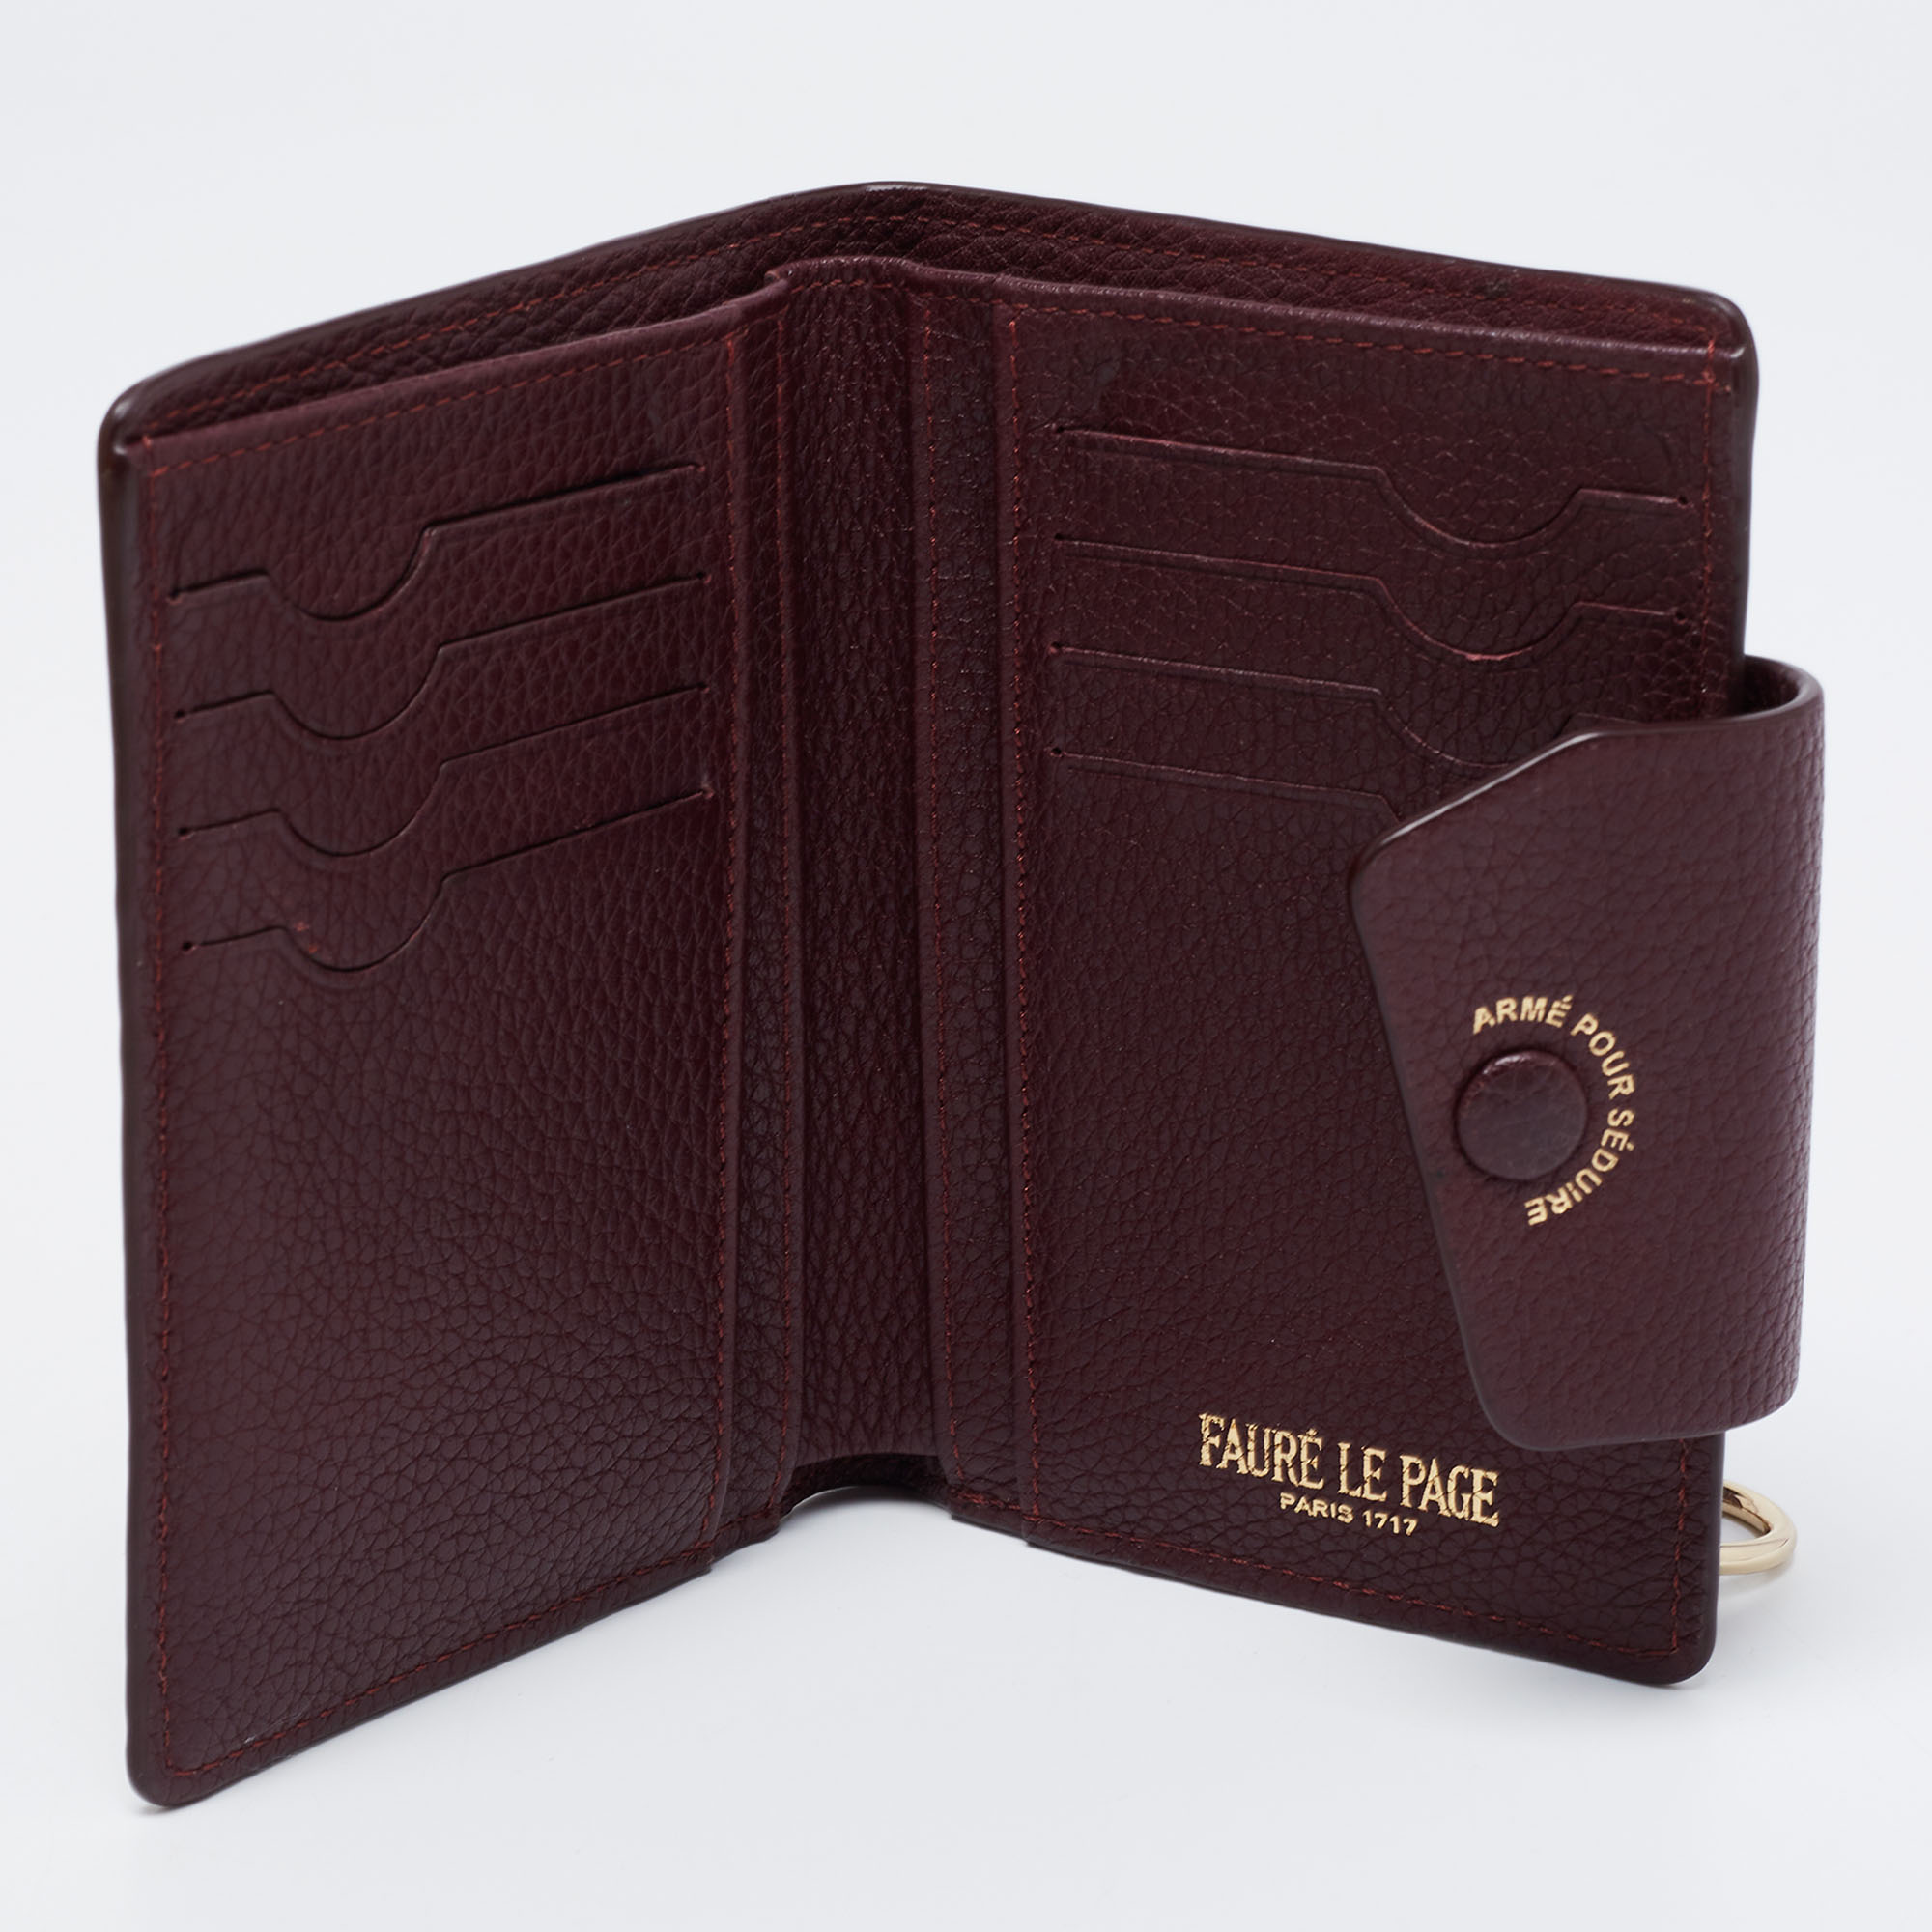 

Faure Le Page Burgundy Coated Canvas and Leather Calibre Bifold Wallet